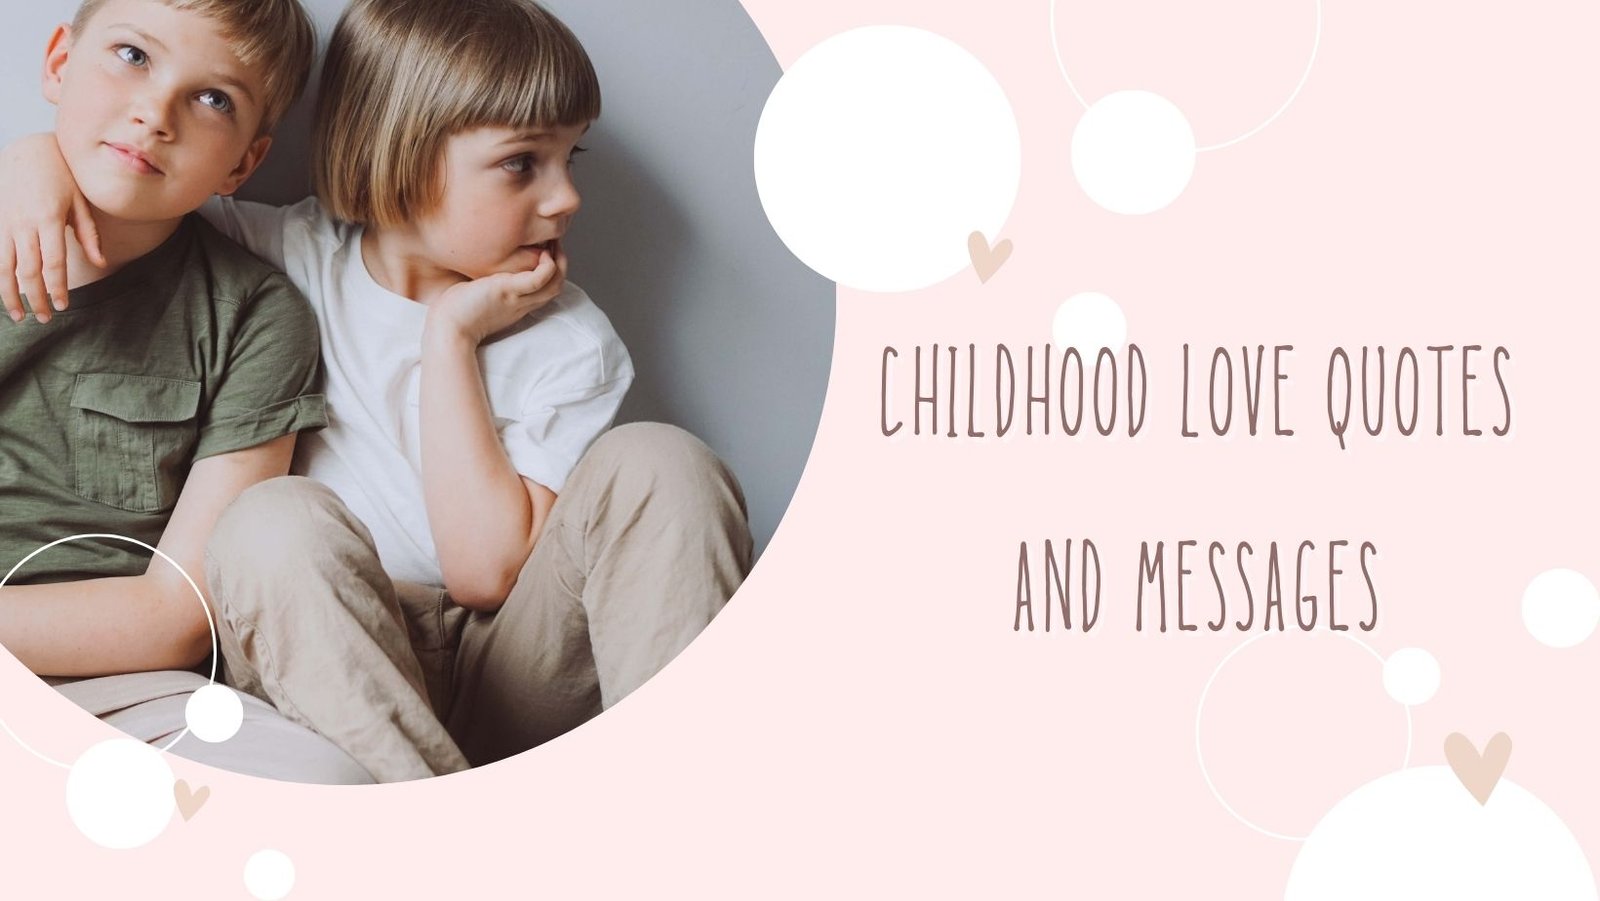 Childhood Love Quotes and Messages